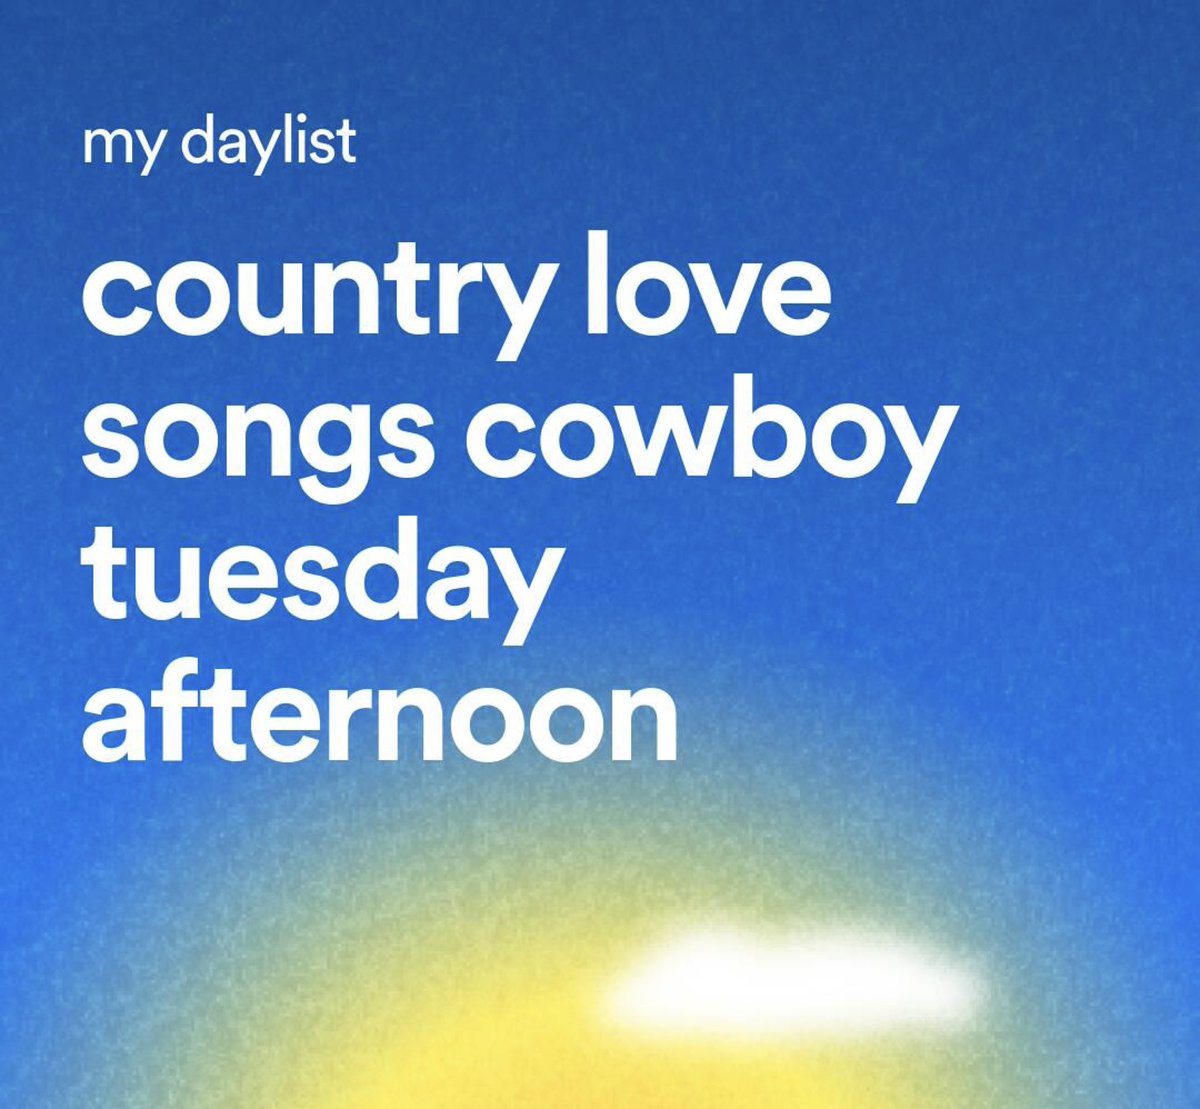 love a new way for @SpotifyUK to expose me yee haw to cowboy tuesdays 🤠 #daylist